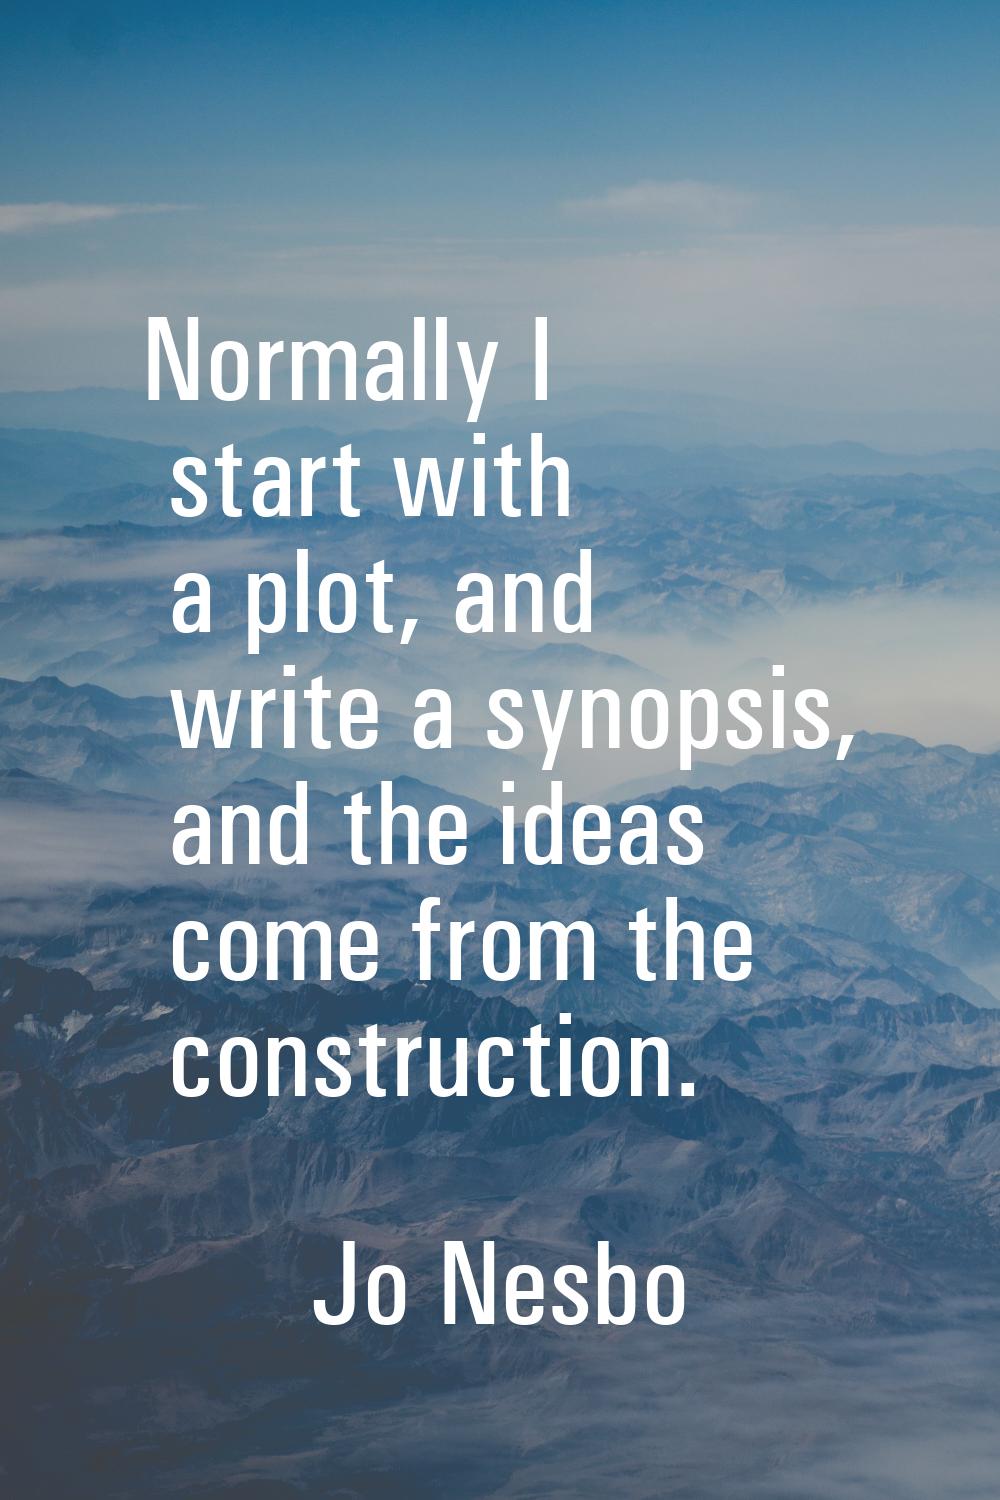 Normally I start with a plot, and write a synopsis, and the ideas come from the construction.